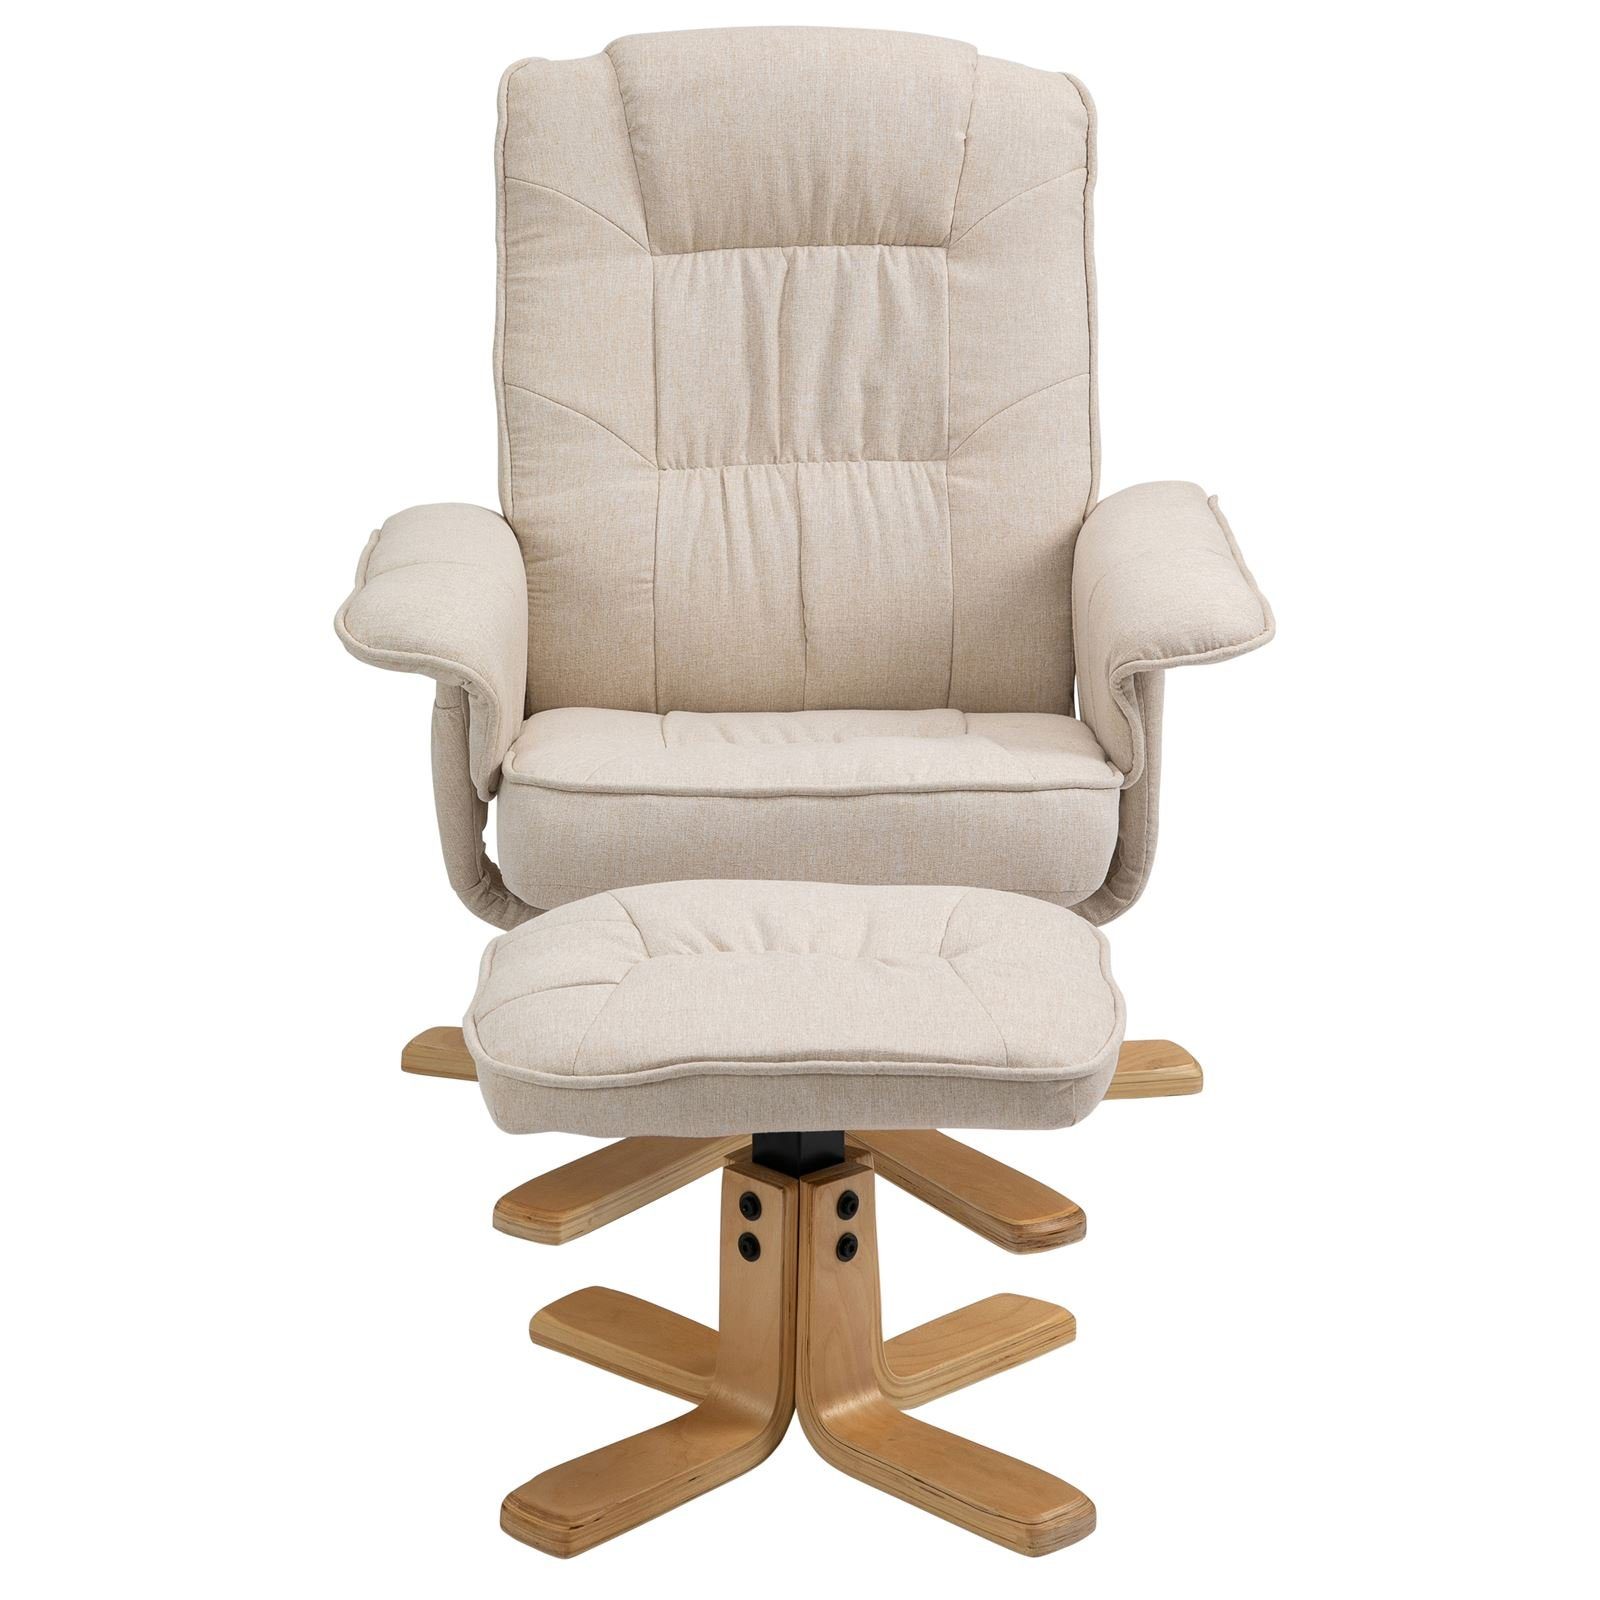 Fernsehsessel Stoff mit be beige Drehsessel Relaxsessel CHARLY, Hocker IDIMEX Relaxsessel Polstersessel